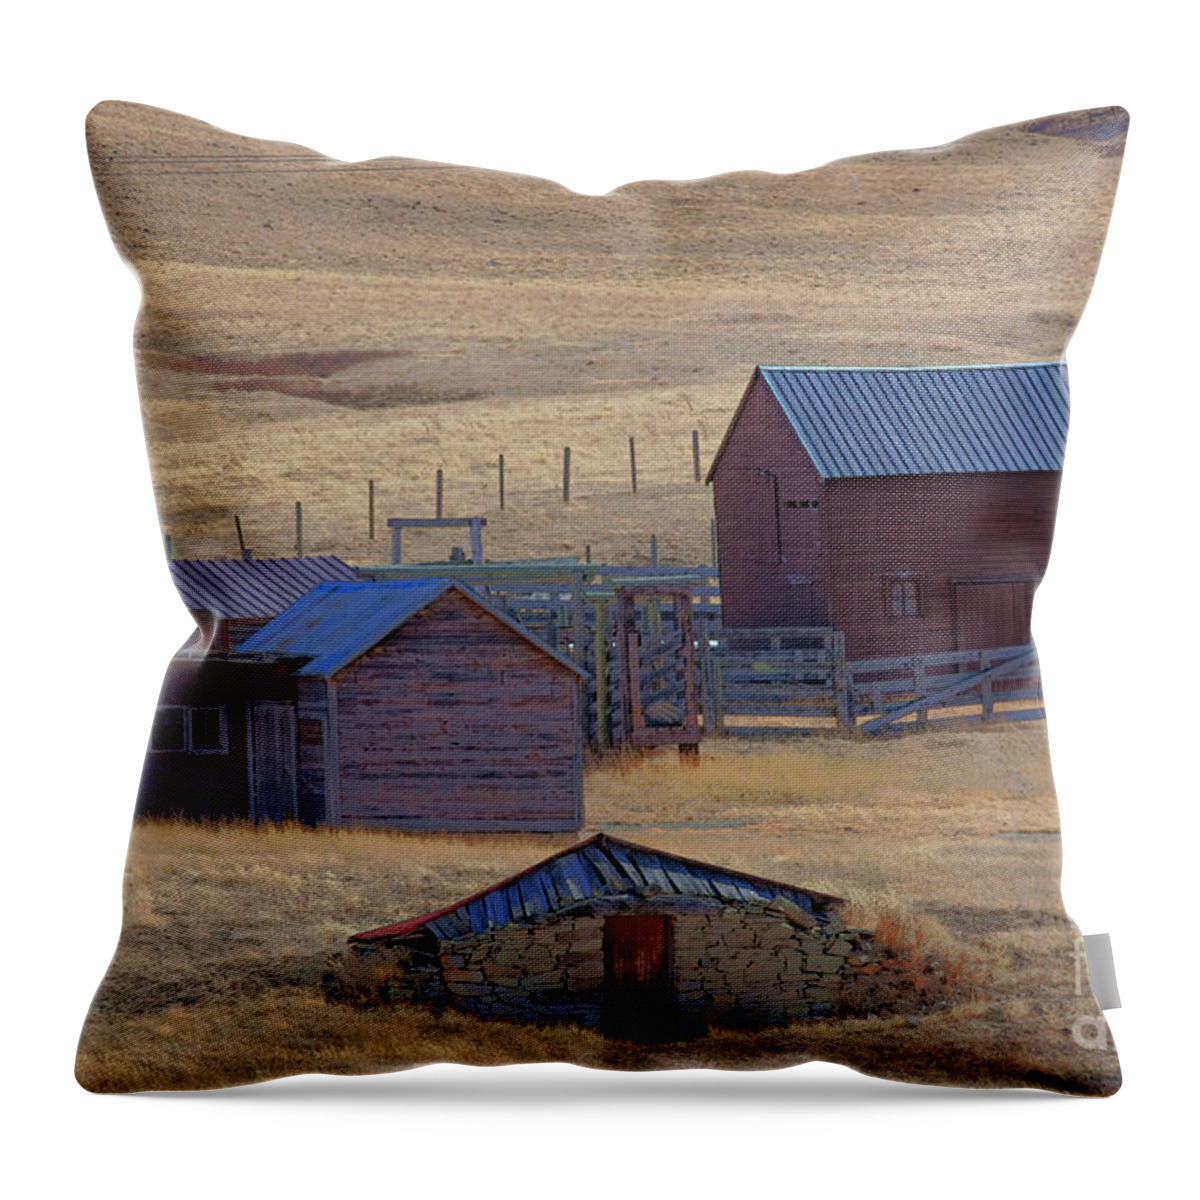 Buildings Throw Pillow featuring the photograph Ranch Buildings by Kae Cheatham